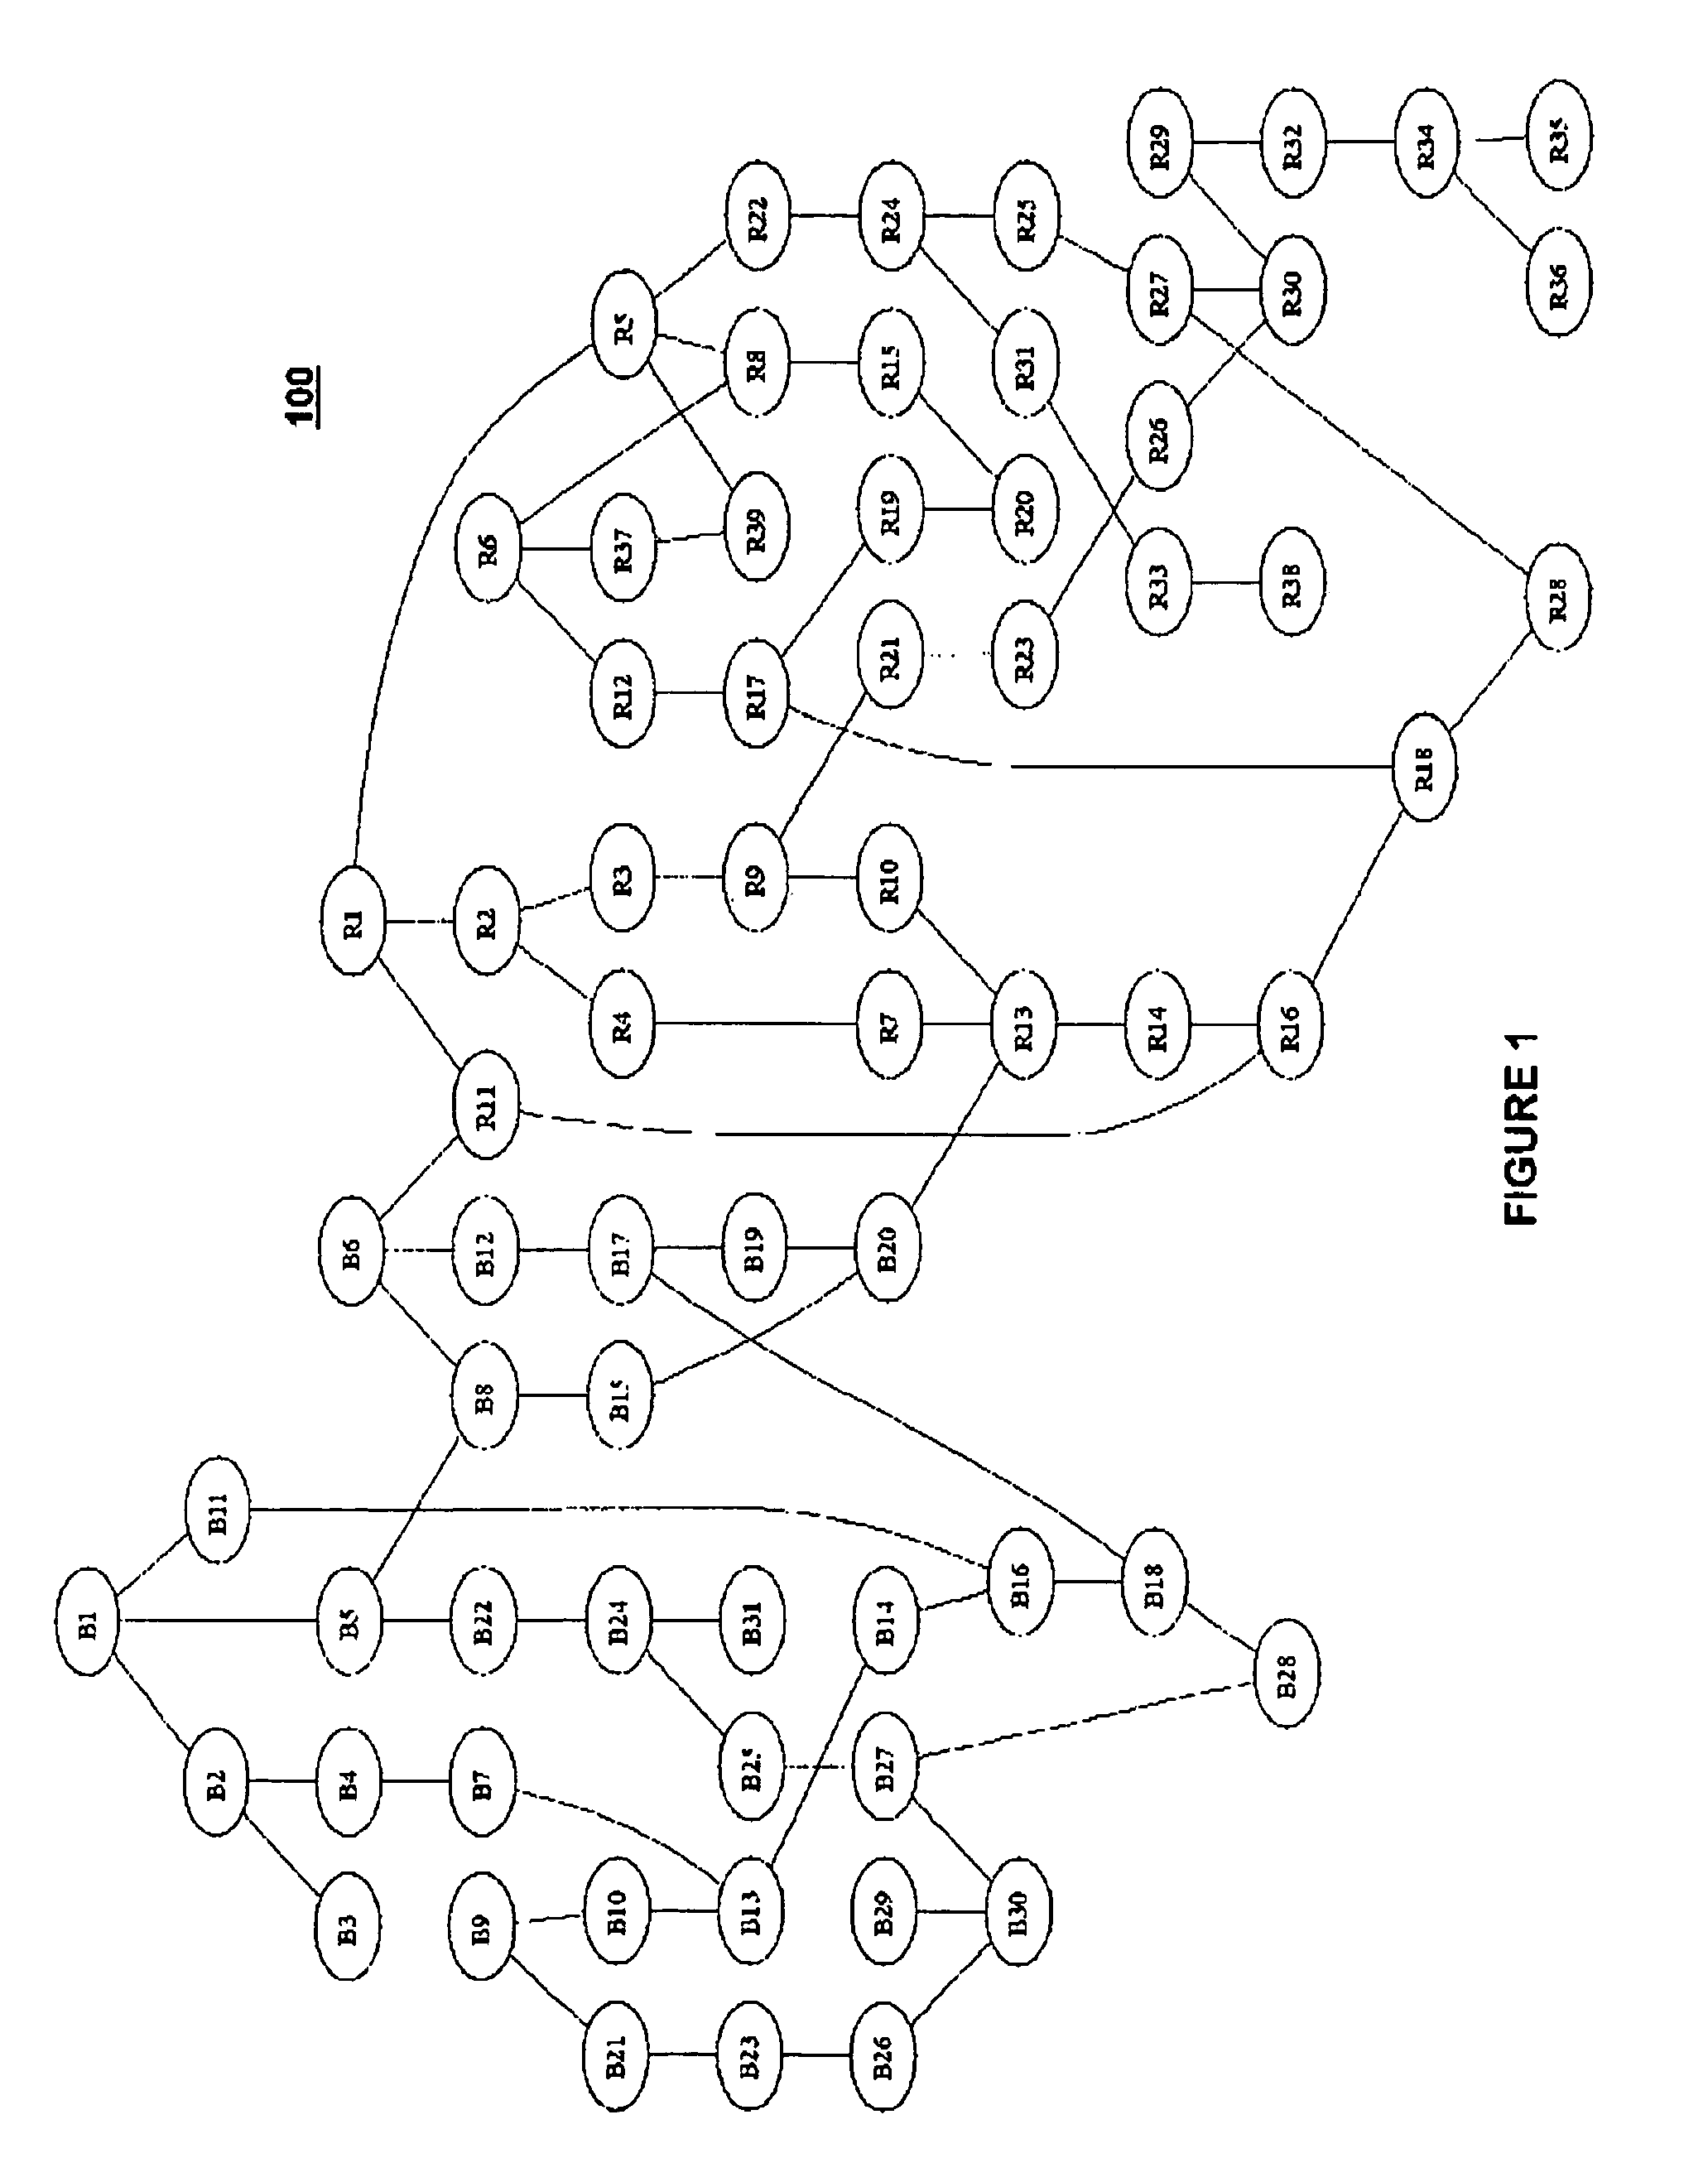 System and method for constructing a social network from multiple disparate, heterogeneous data sources